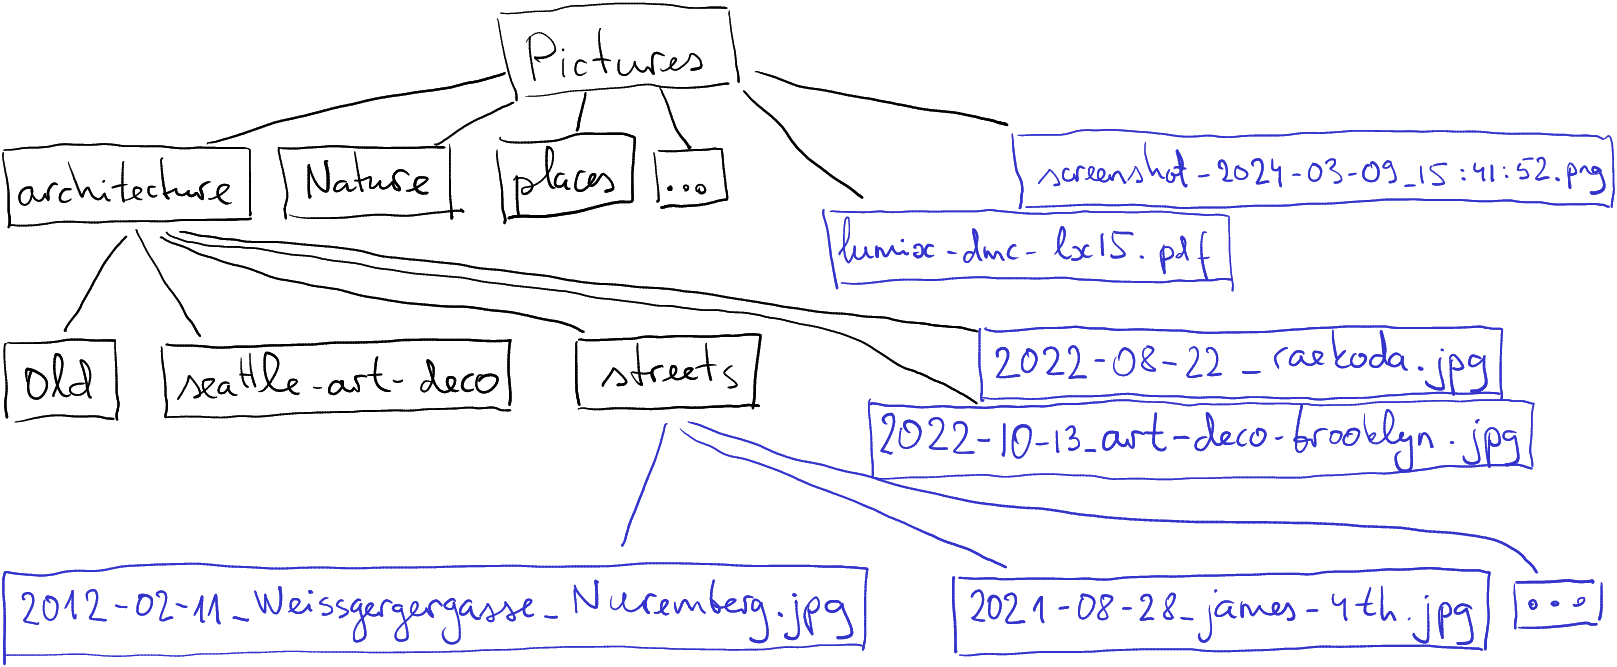 sketch of my Pictures folder tree